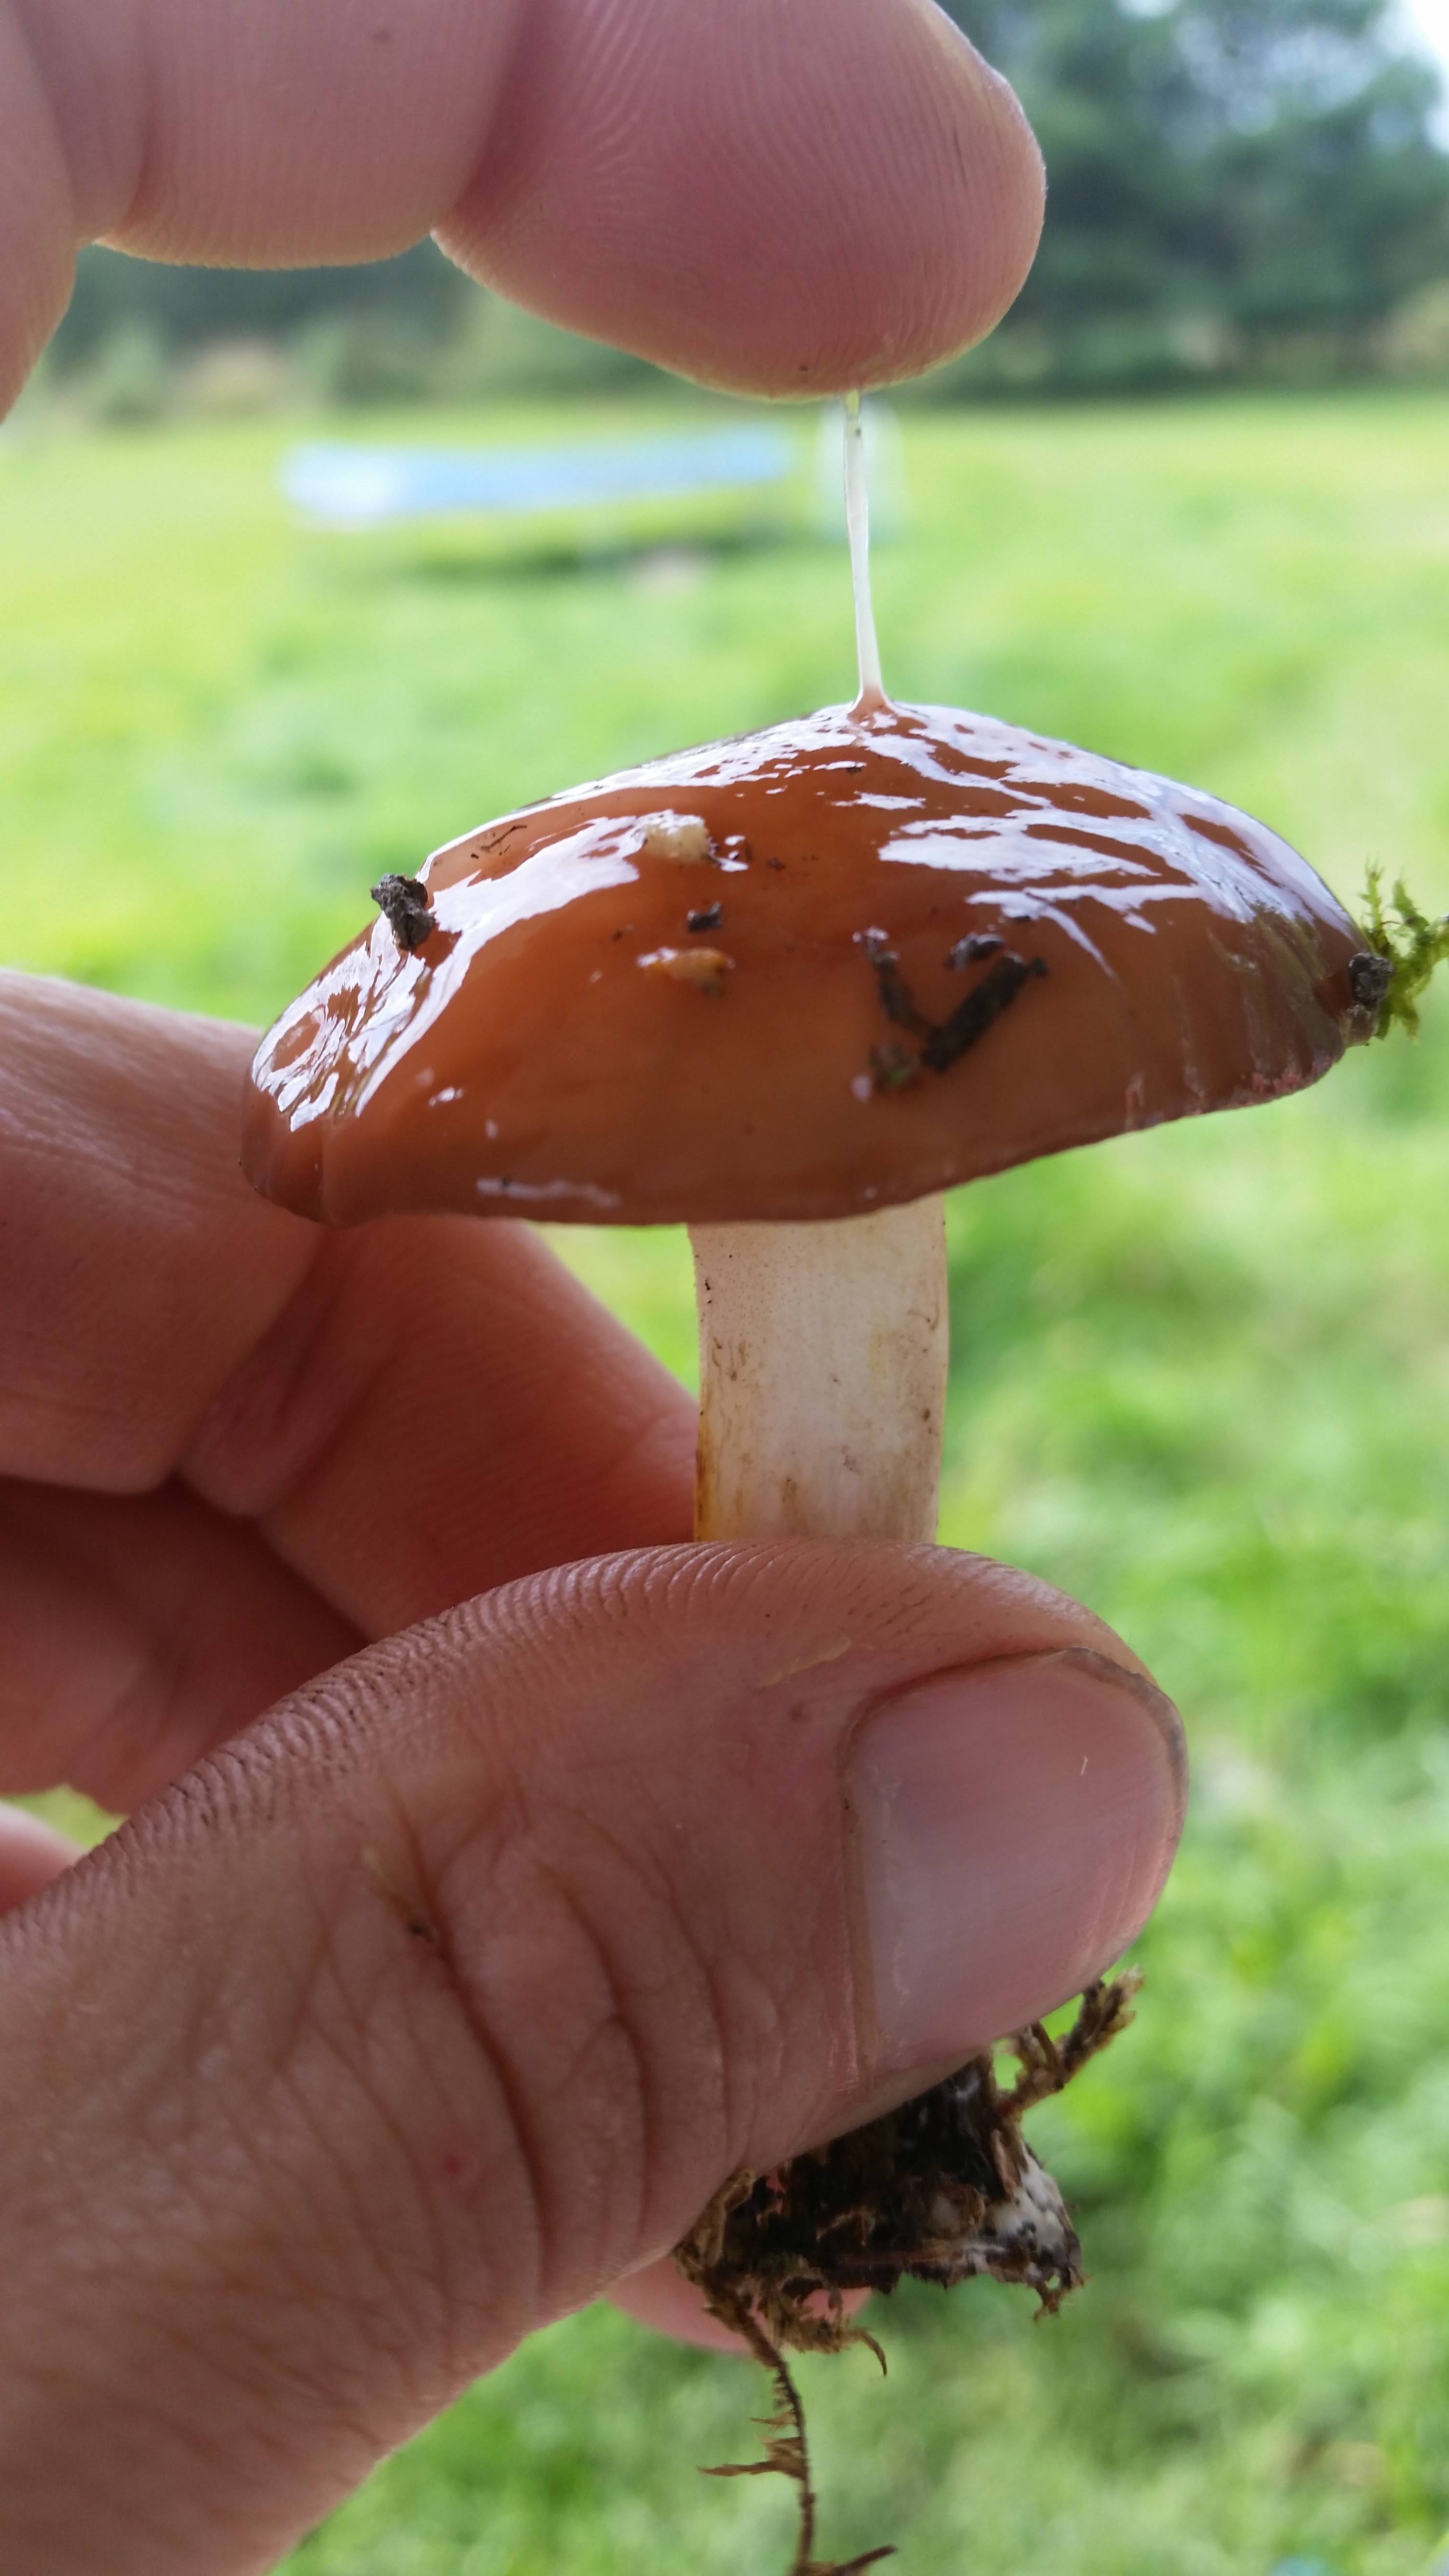 Introductory Mushroom Identification course with Viki Mather- Sunday October 1st 9:30-3:30!!